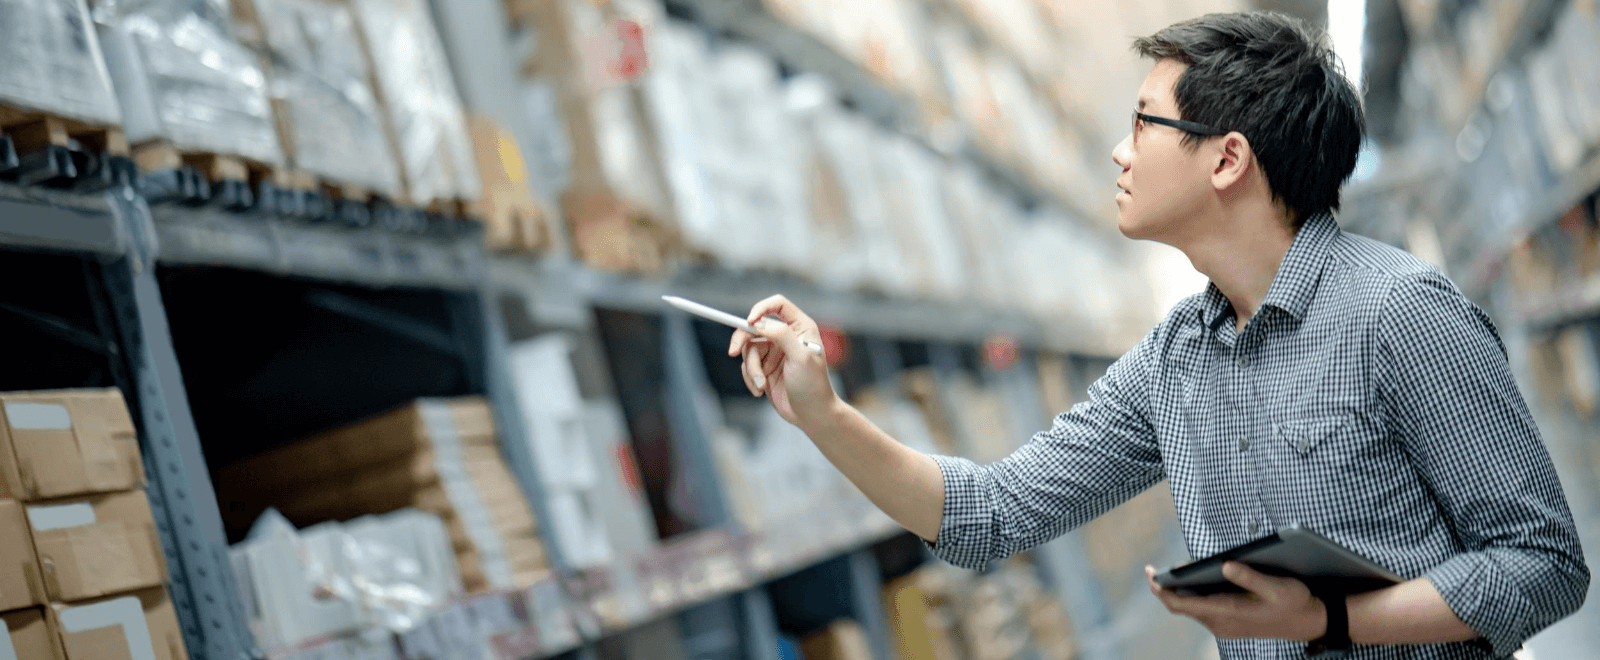 AssetTracer helps you keep track of your warehouse management equipment